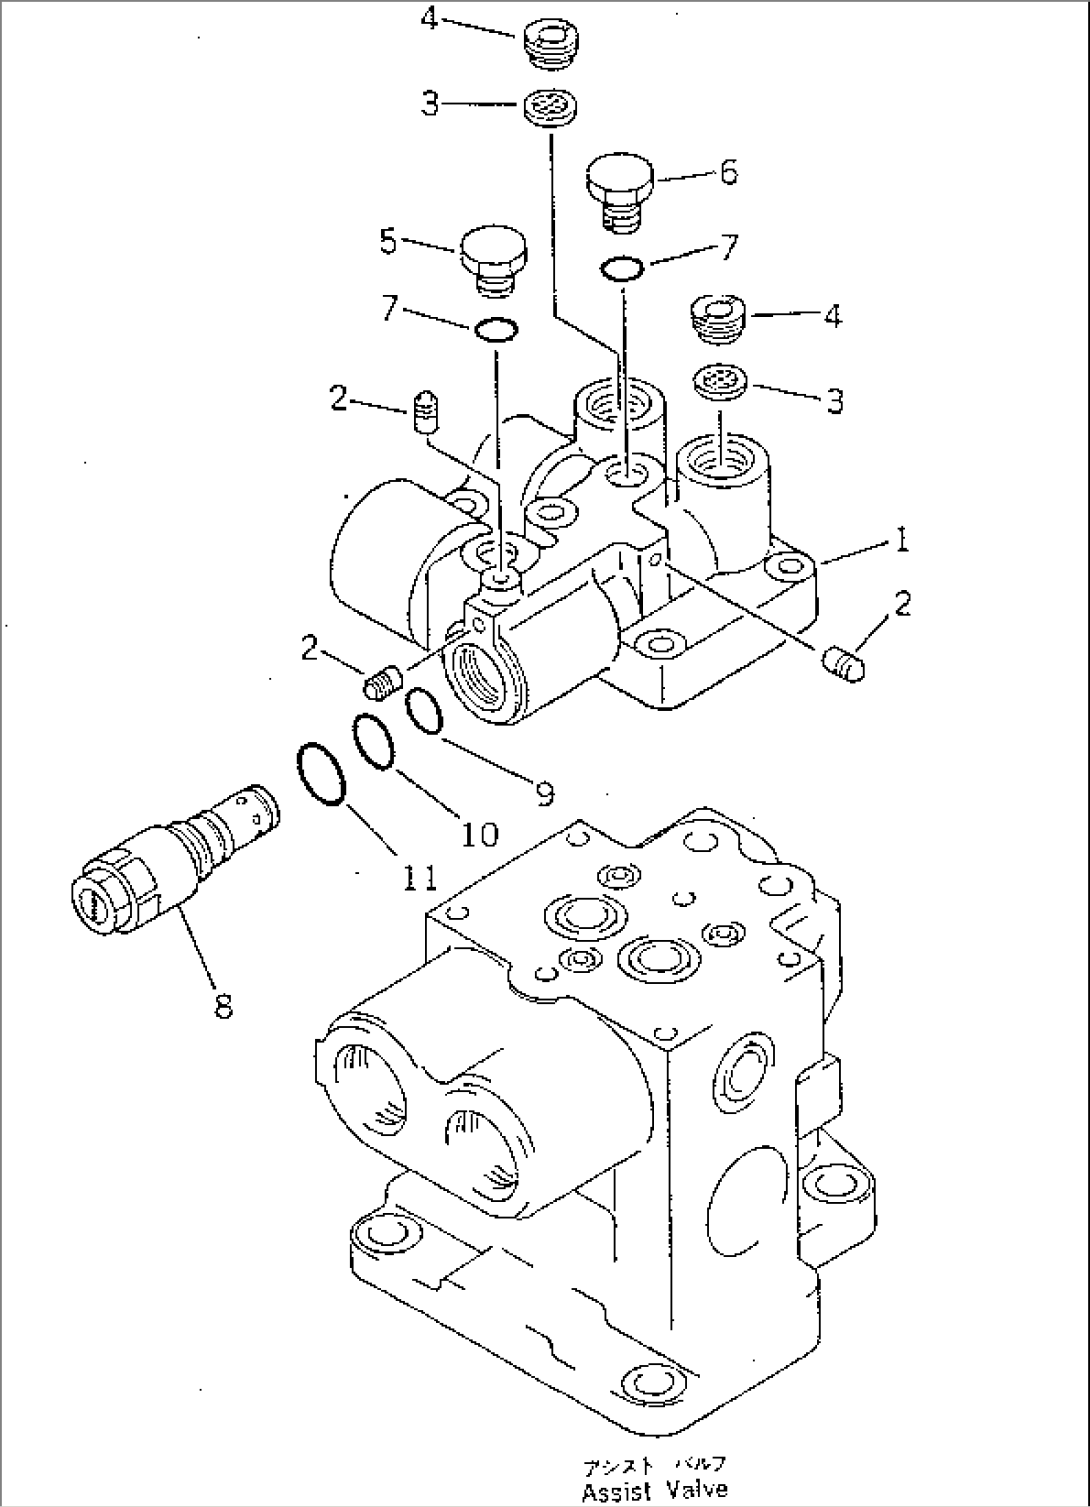 RELIEF VALVE BLOCK AND CHARGE RELIEF VALVE